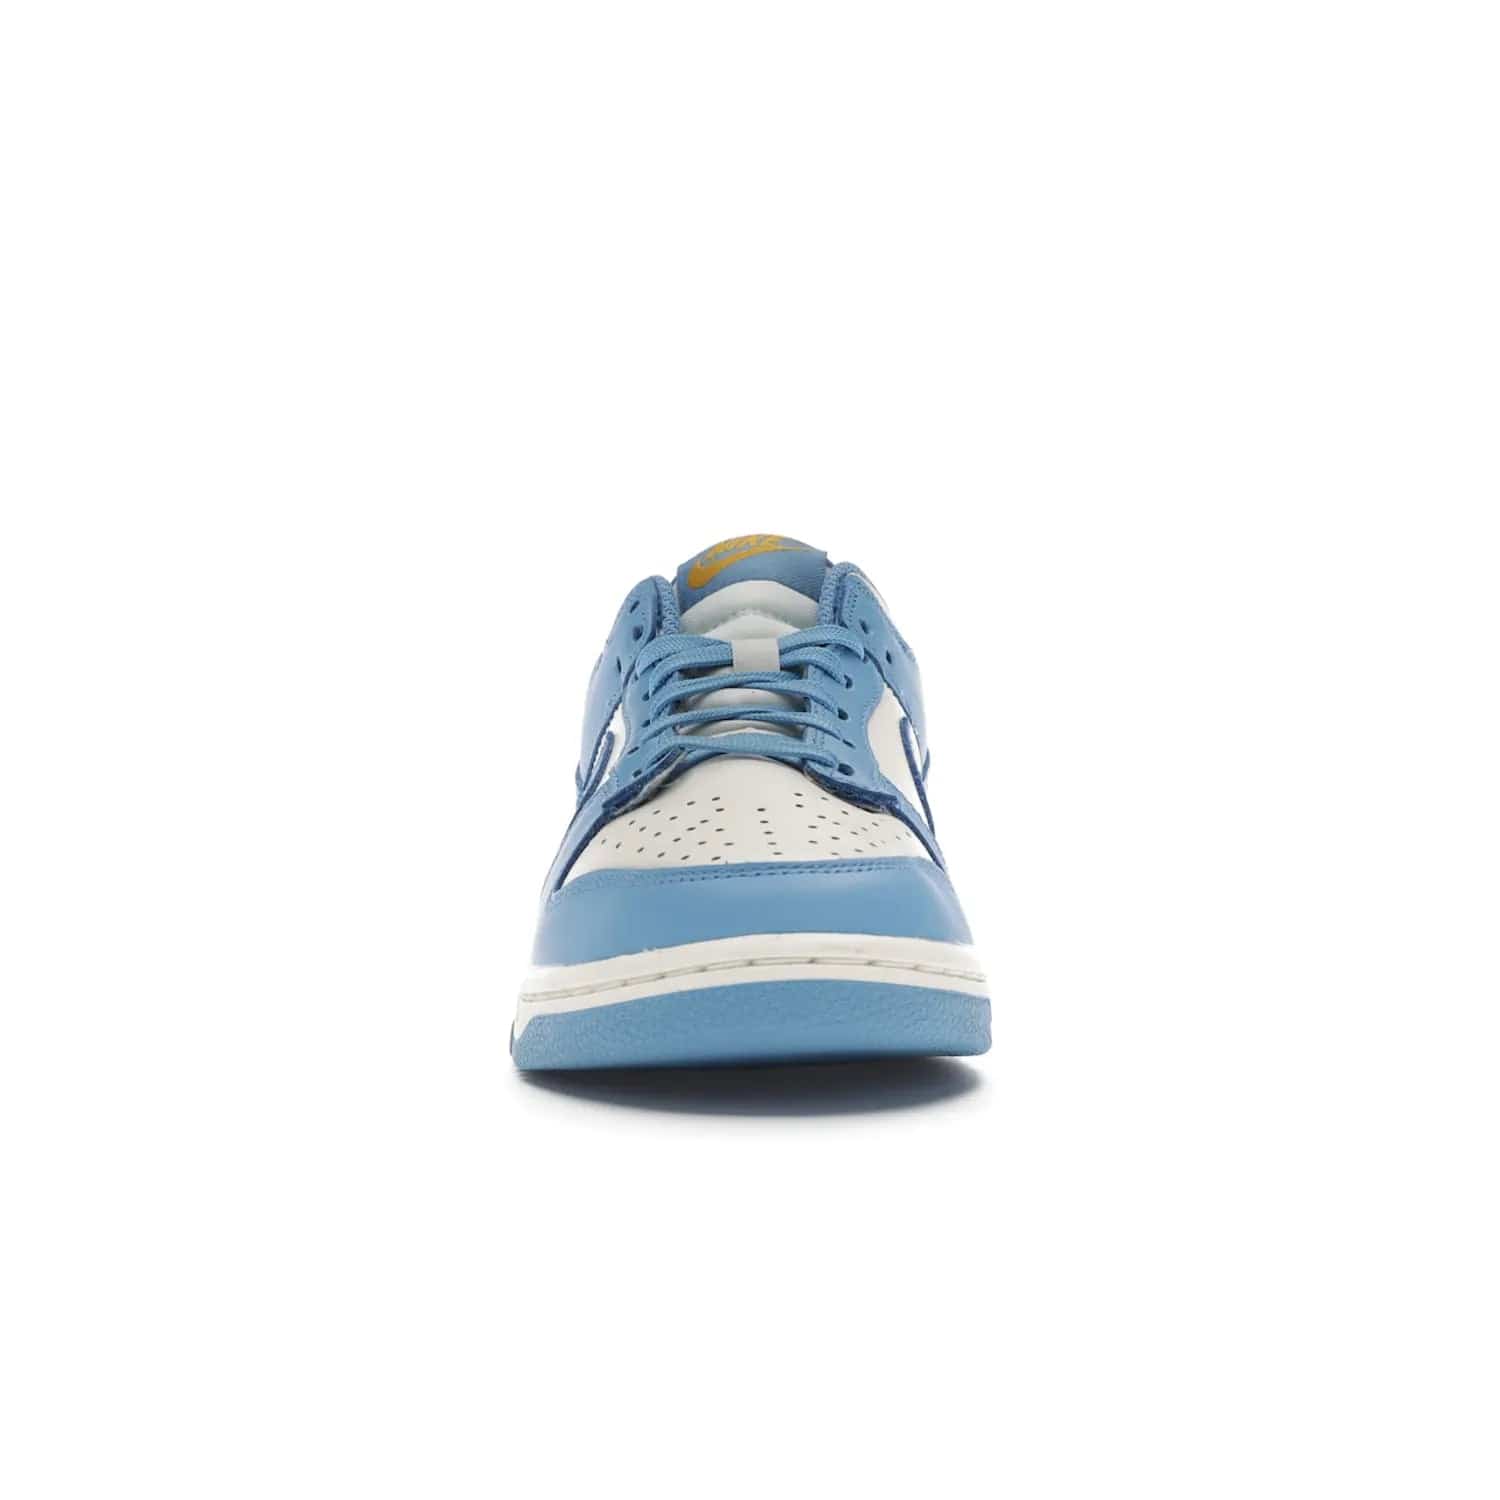 Nike Dunk Low Coast (Women's) - Image 10 - Only at www.BallersClubKickz.com - Iconic UCLA colors honor the west coast with the Nike Dunk Low Coast (Women's), a bold combo of light blue, white and yellow. Light leather upper with white midsole and light EVA outsole offer a modern twist. Released Feb 2021 for $100.